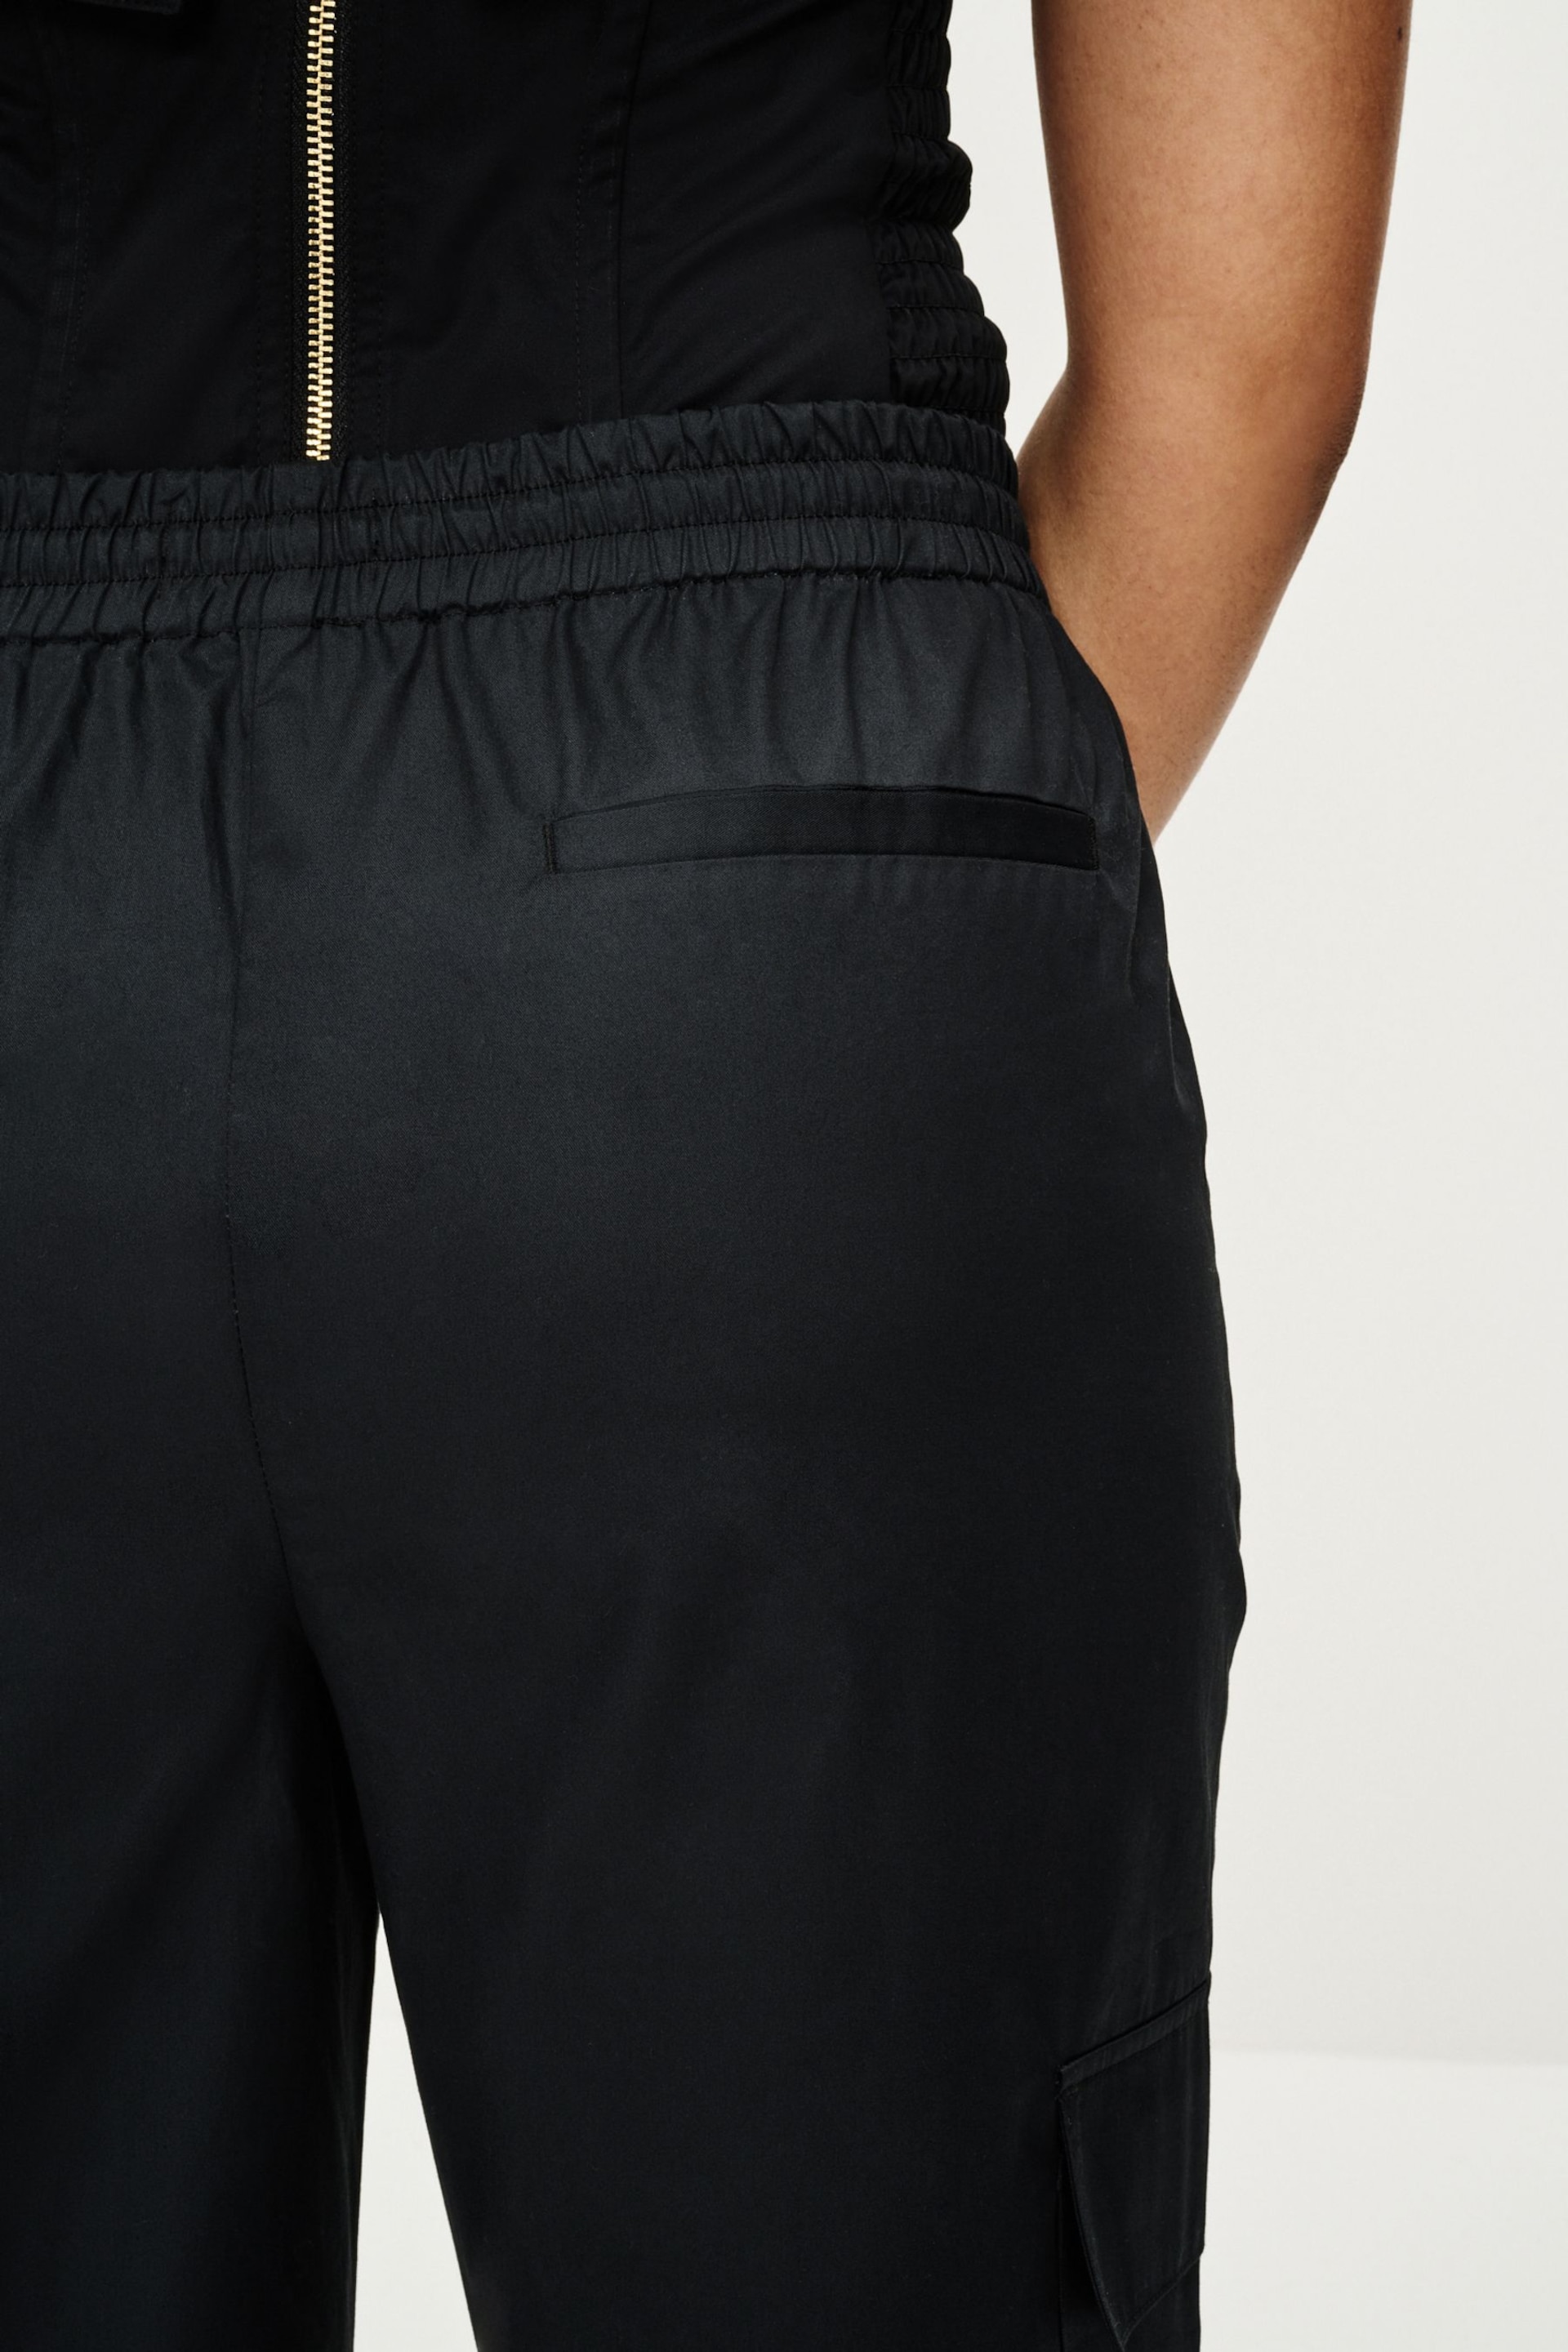 Black Wide Leg Cargo Trousers - Image 4 of 7